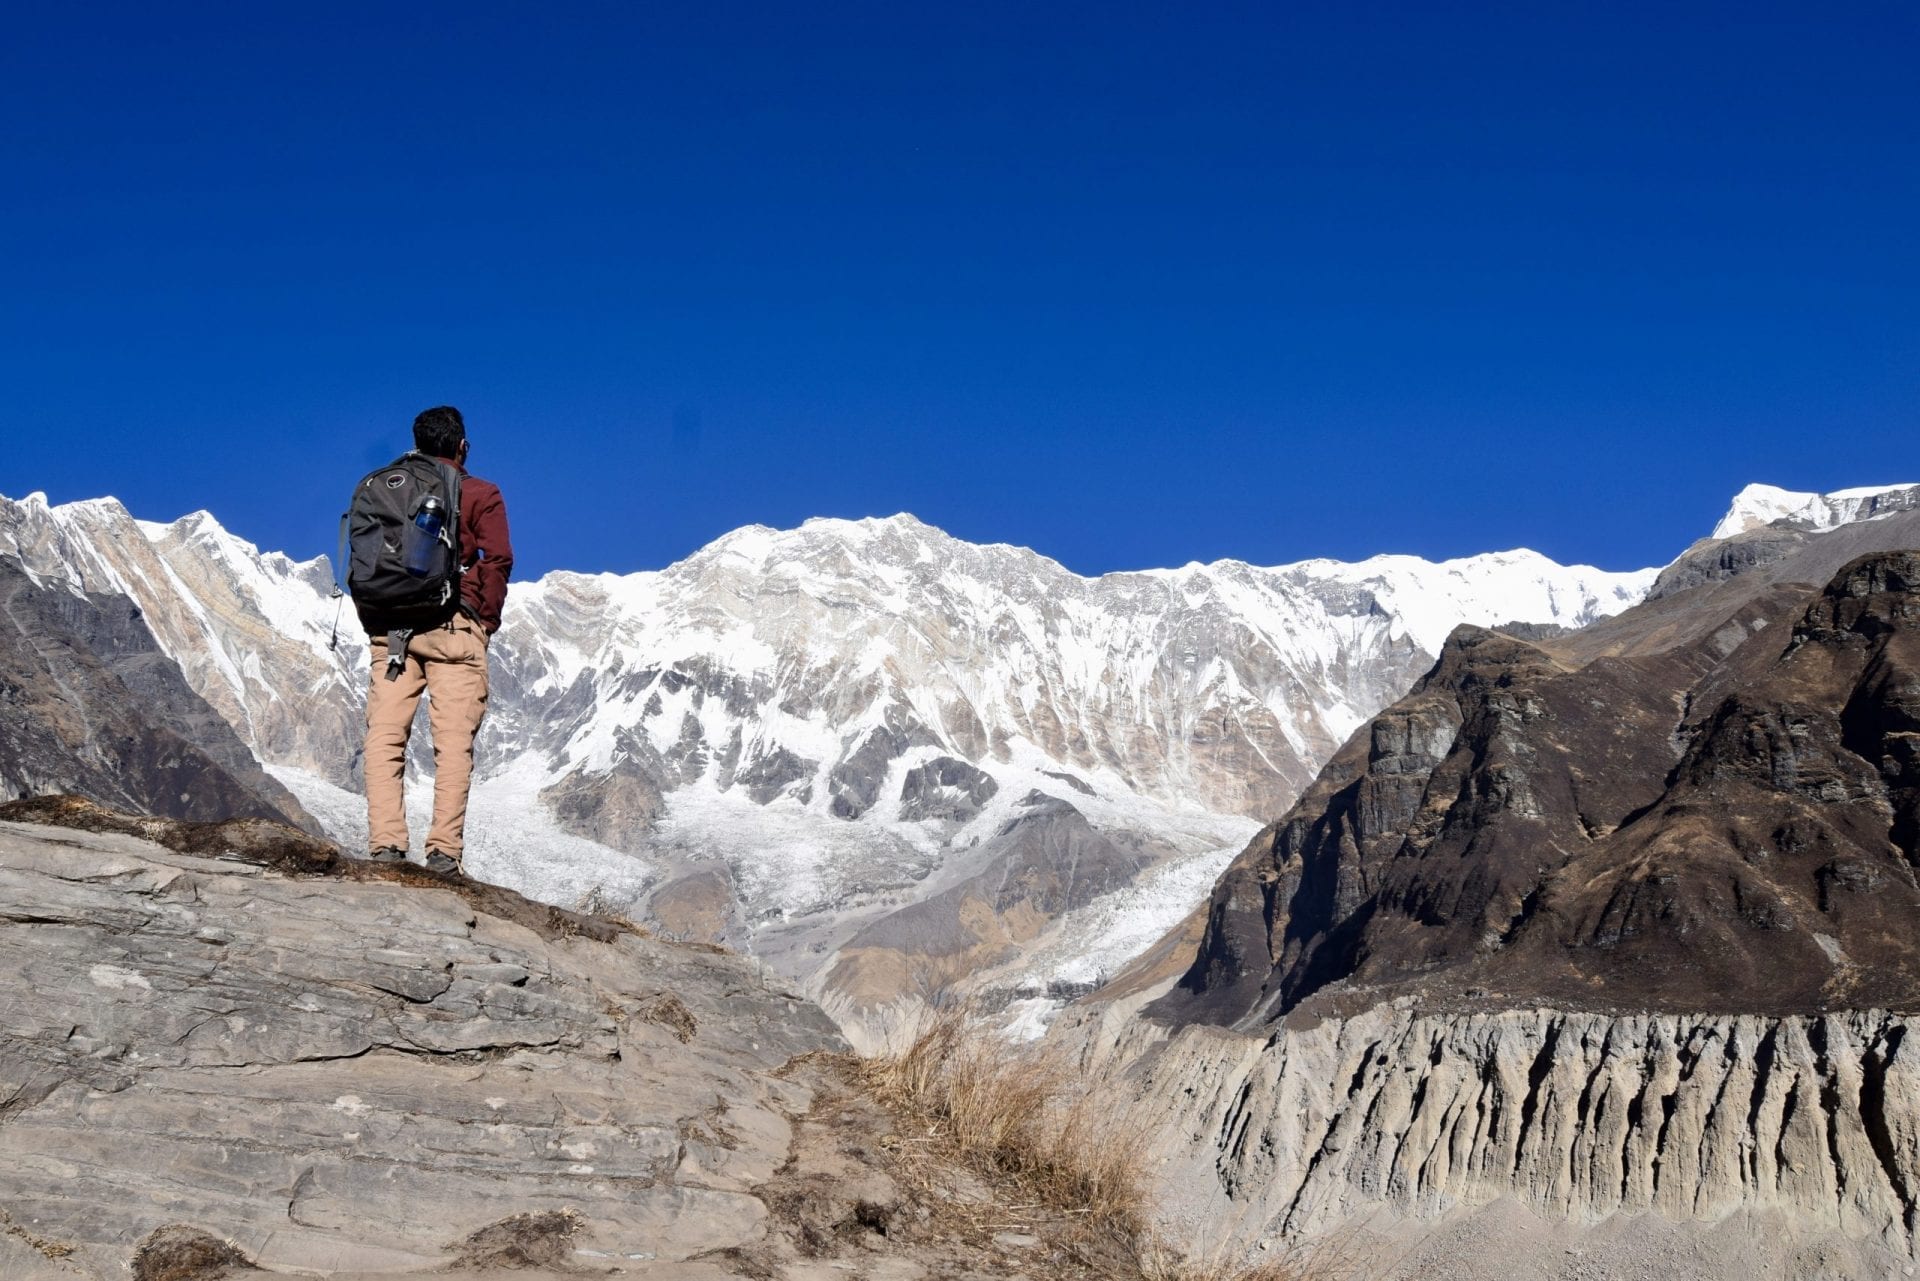 Standing in front of Annapurna Mountain